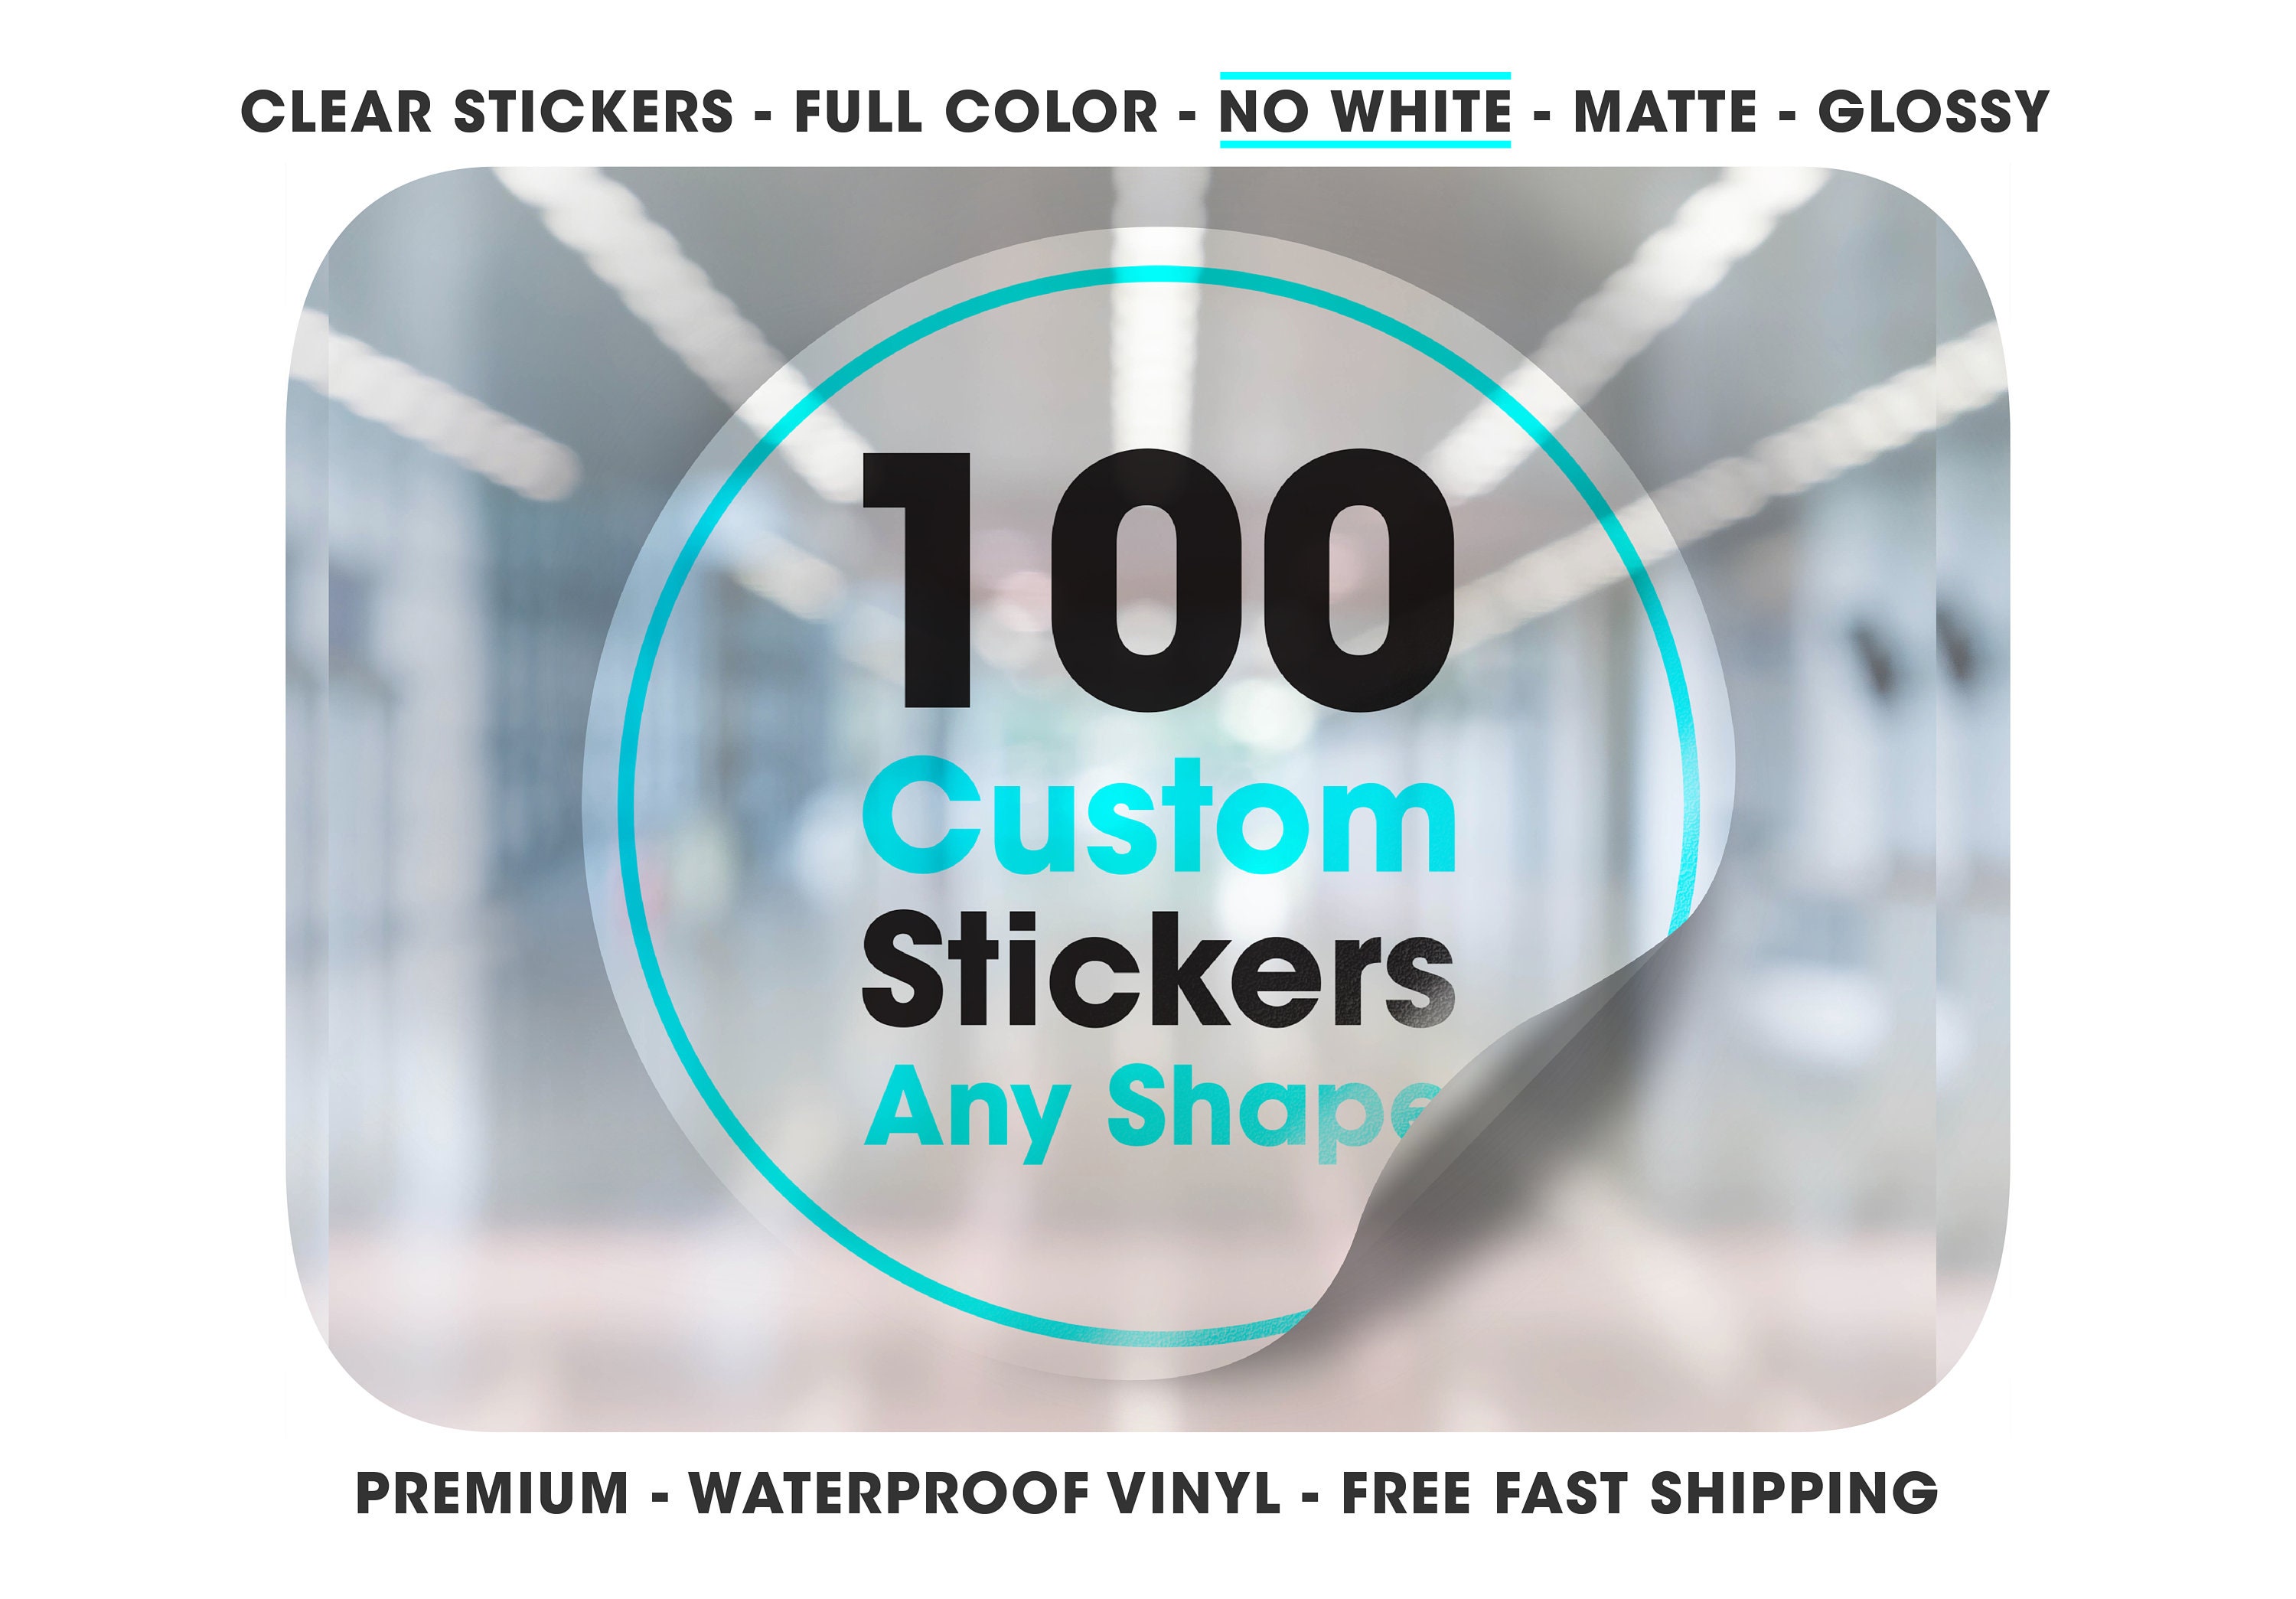 Full Color Clear Stickers